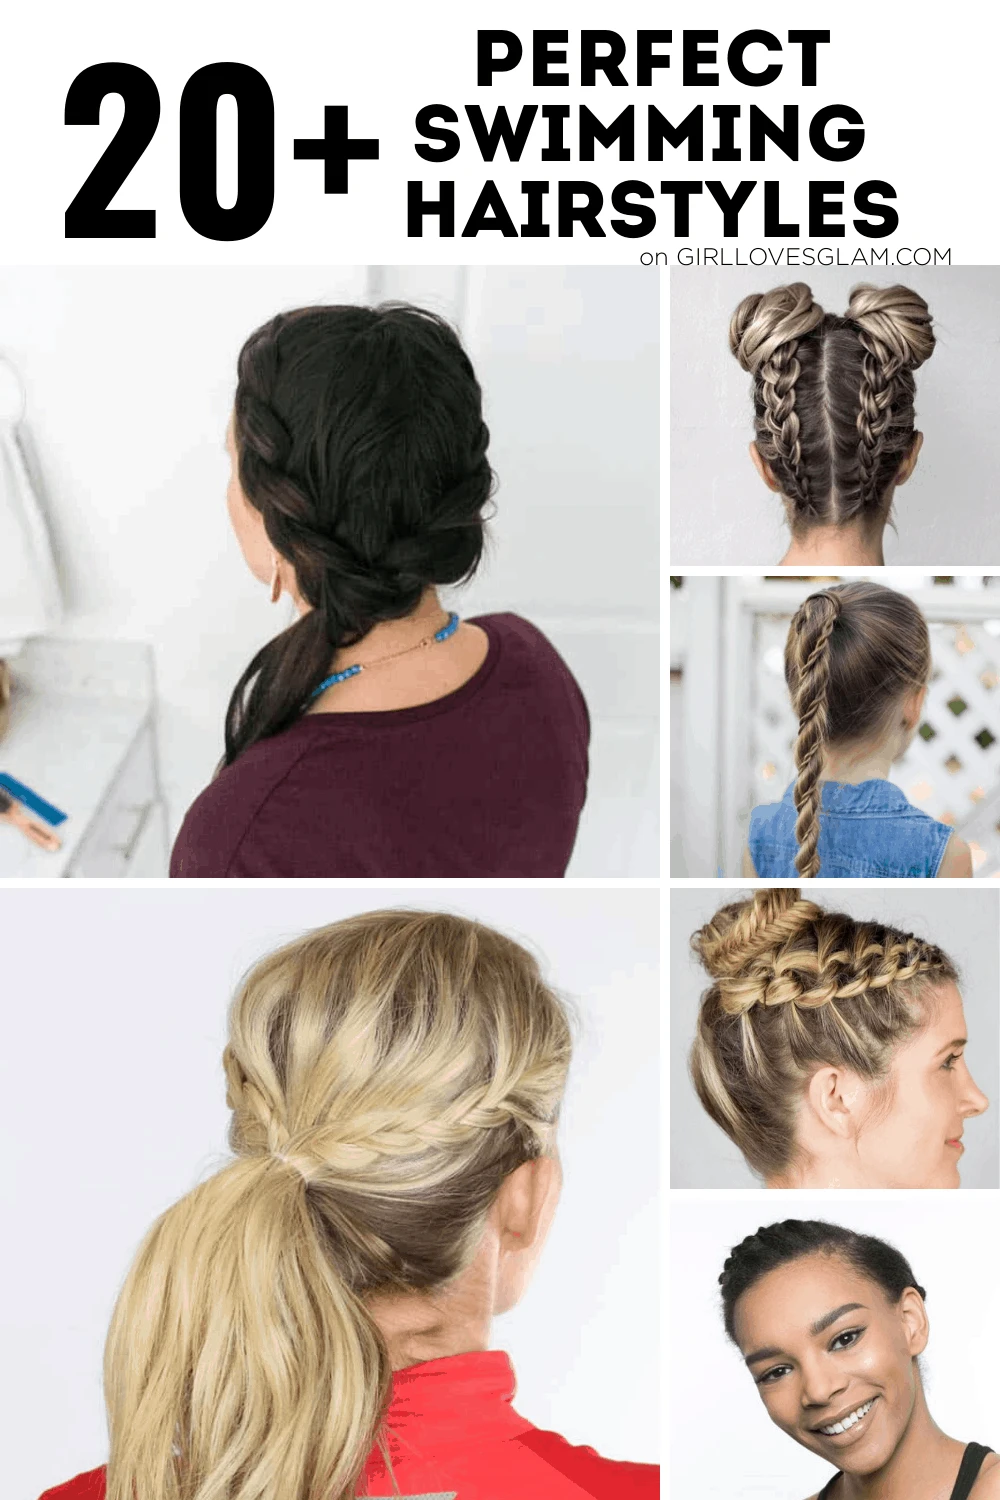 Easy Party Hairstyles for Girls  Stylish Life for Moms